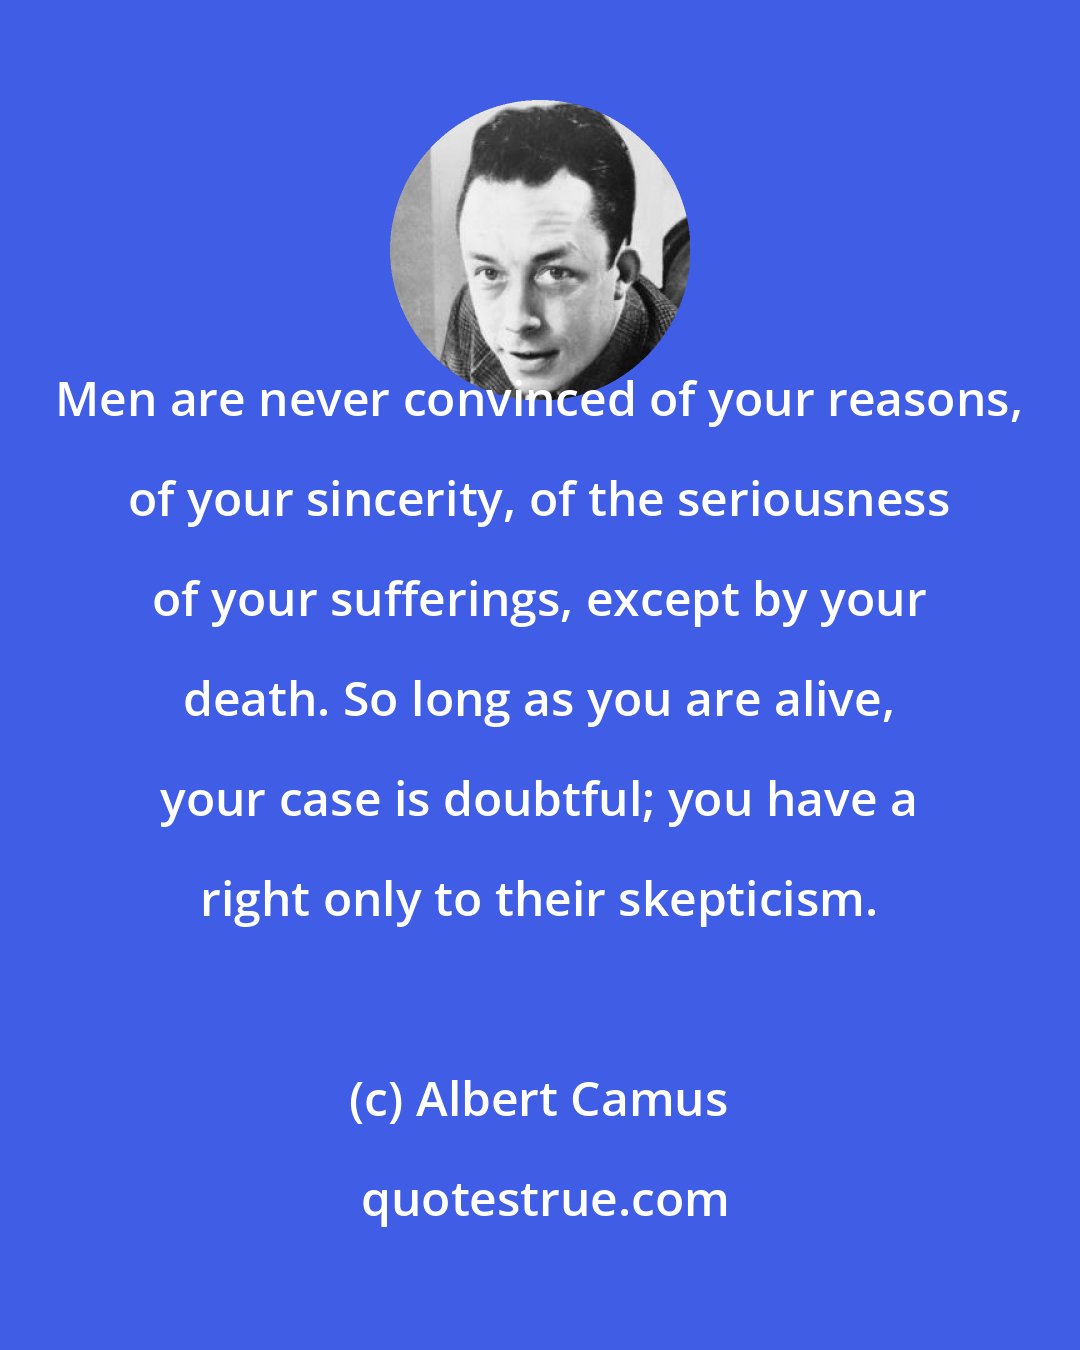 Albert Camus: Men are never convinced of your reasons, of your sincerity, of the seriousness of your sufferings, except by your death. So long as you are alive, your case is doubtful; you have a right only to their skepticism.